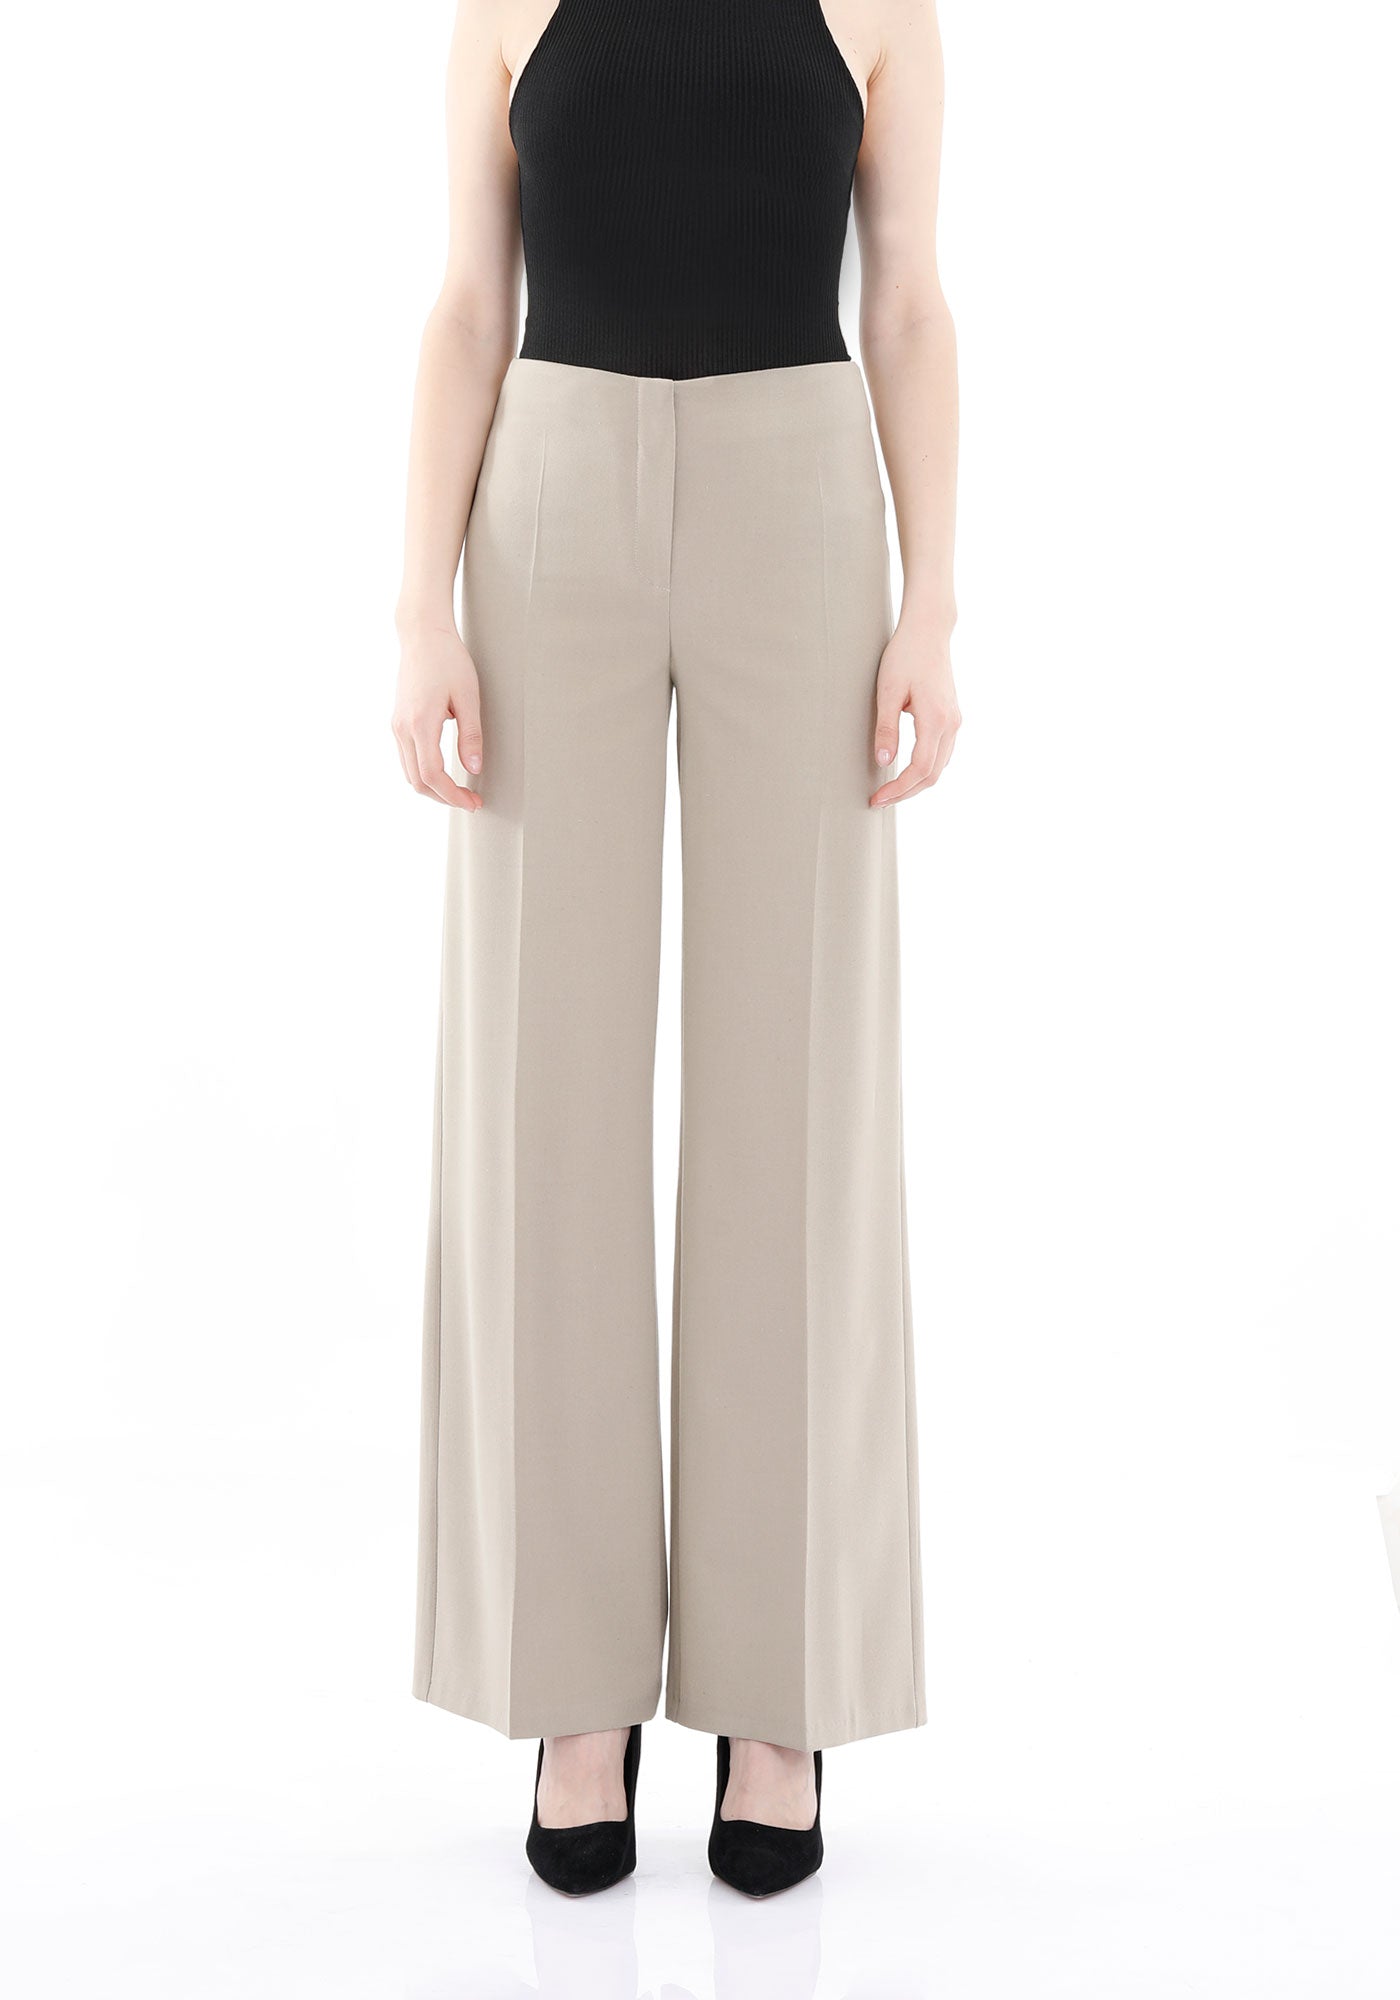 Beige Straight-Leg Pants for a Sleek and Stylish Look G-Line